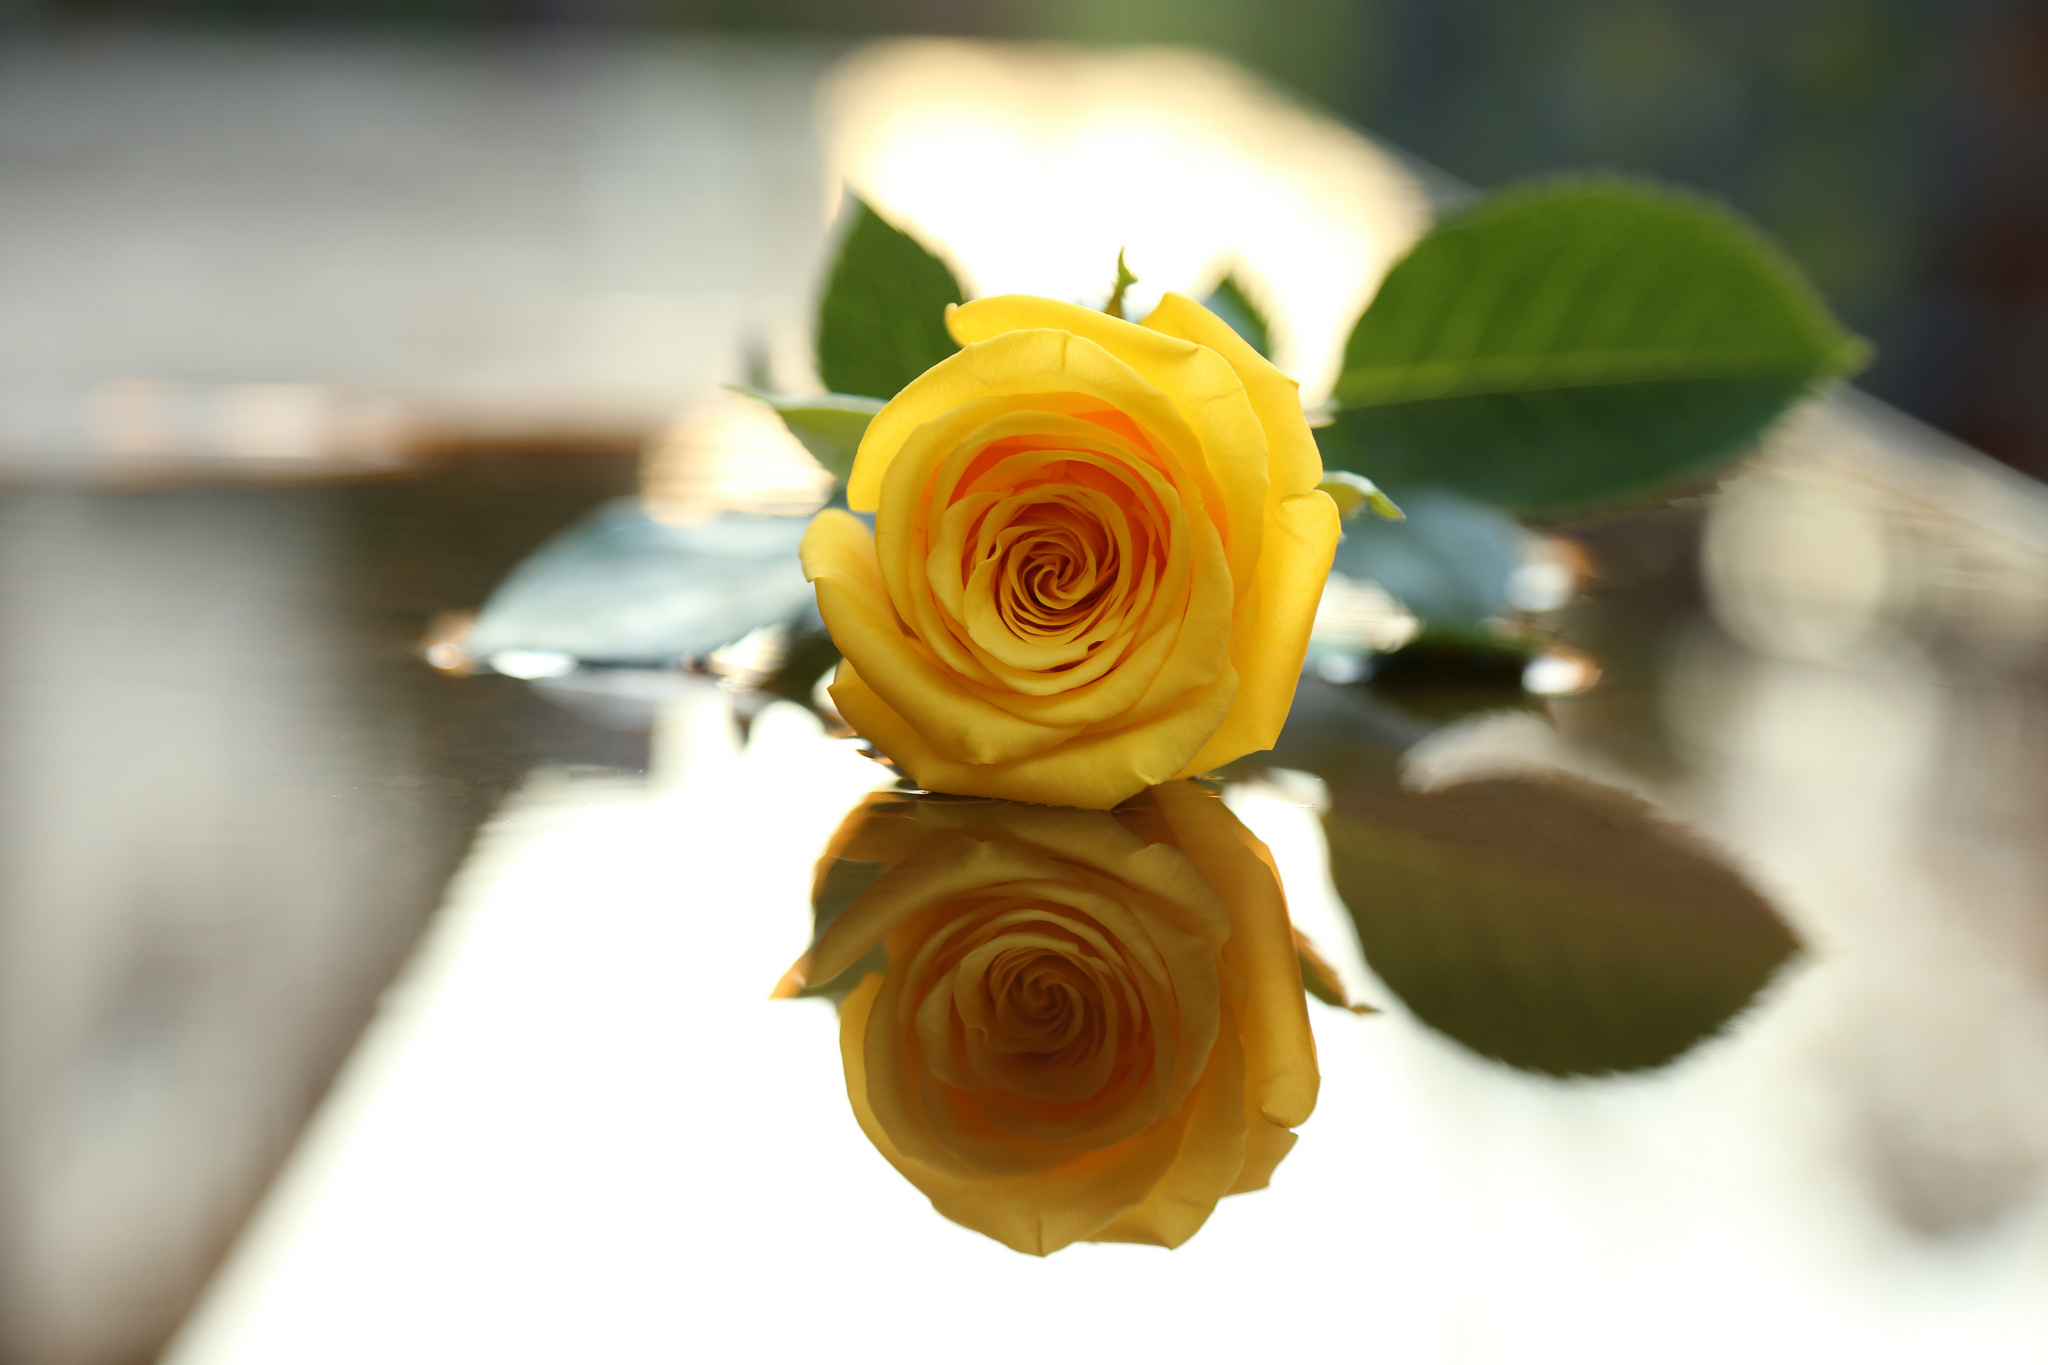 yellow flower, flowers, rose, leaf, flower, yellow rose, reflection, earth